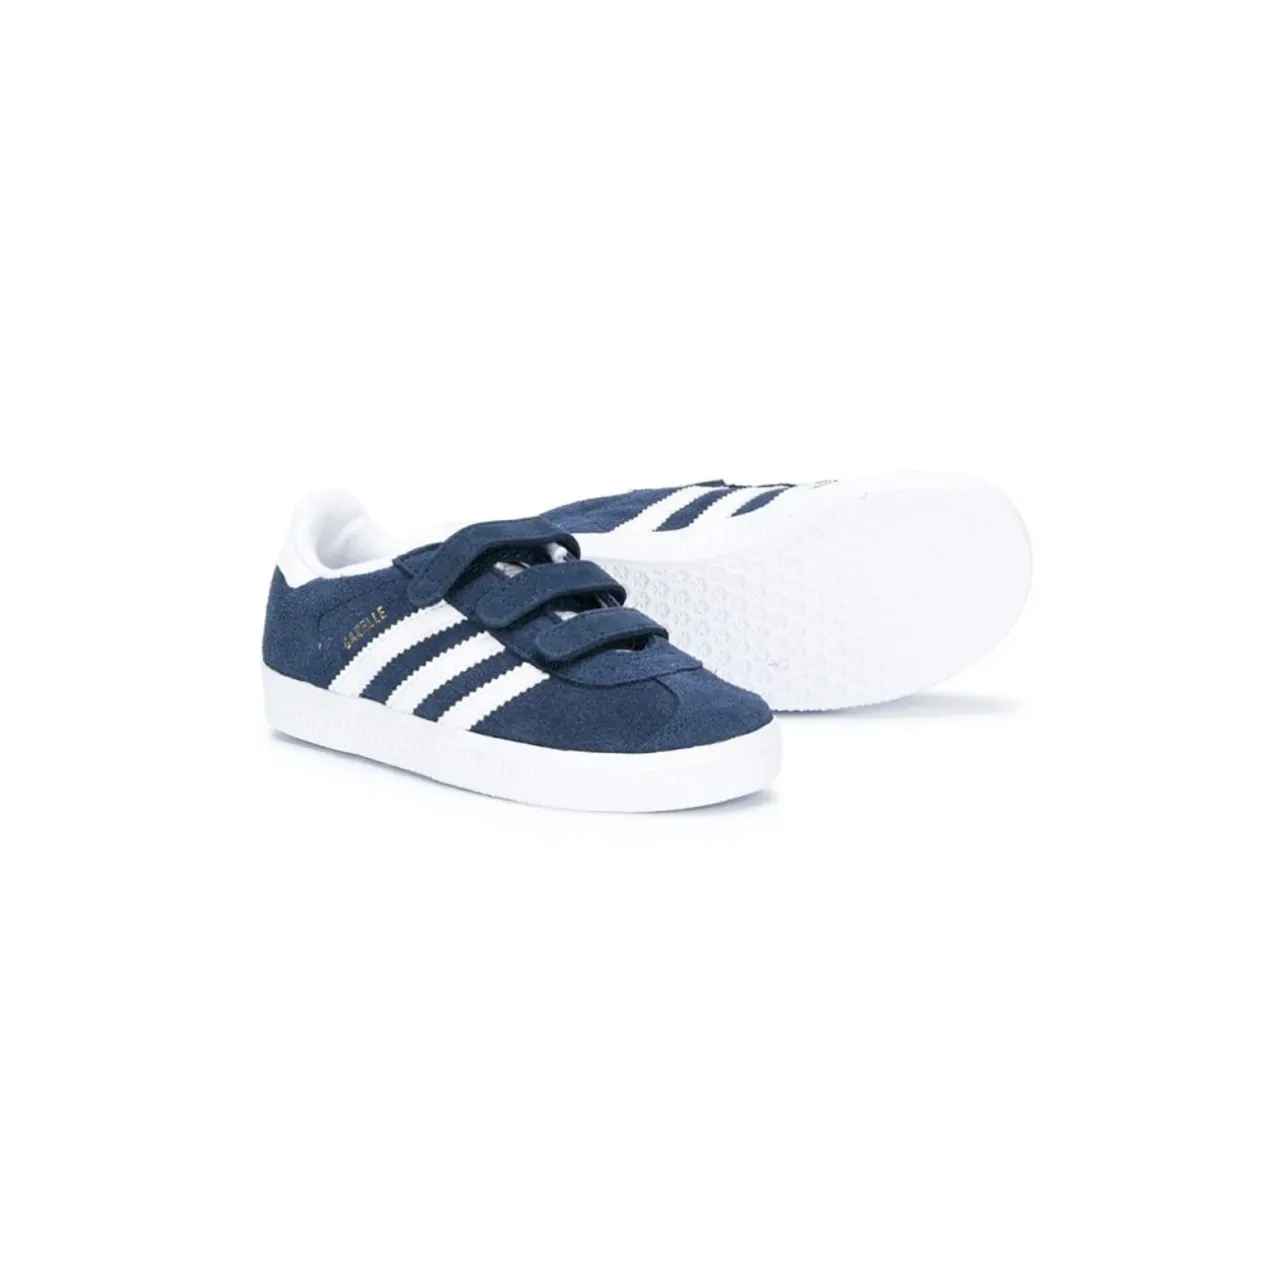 Adidas , Comfort Suede Sneakers ,Blue male, Sizes: